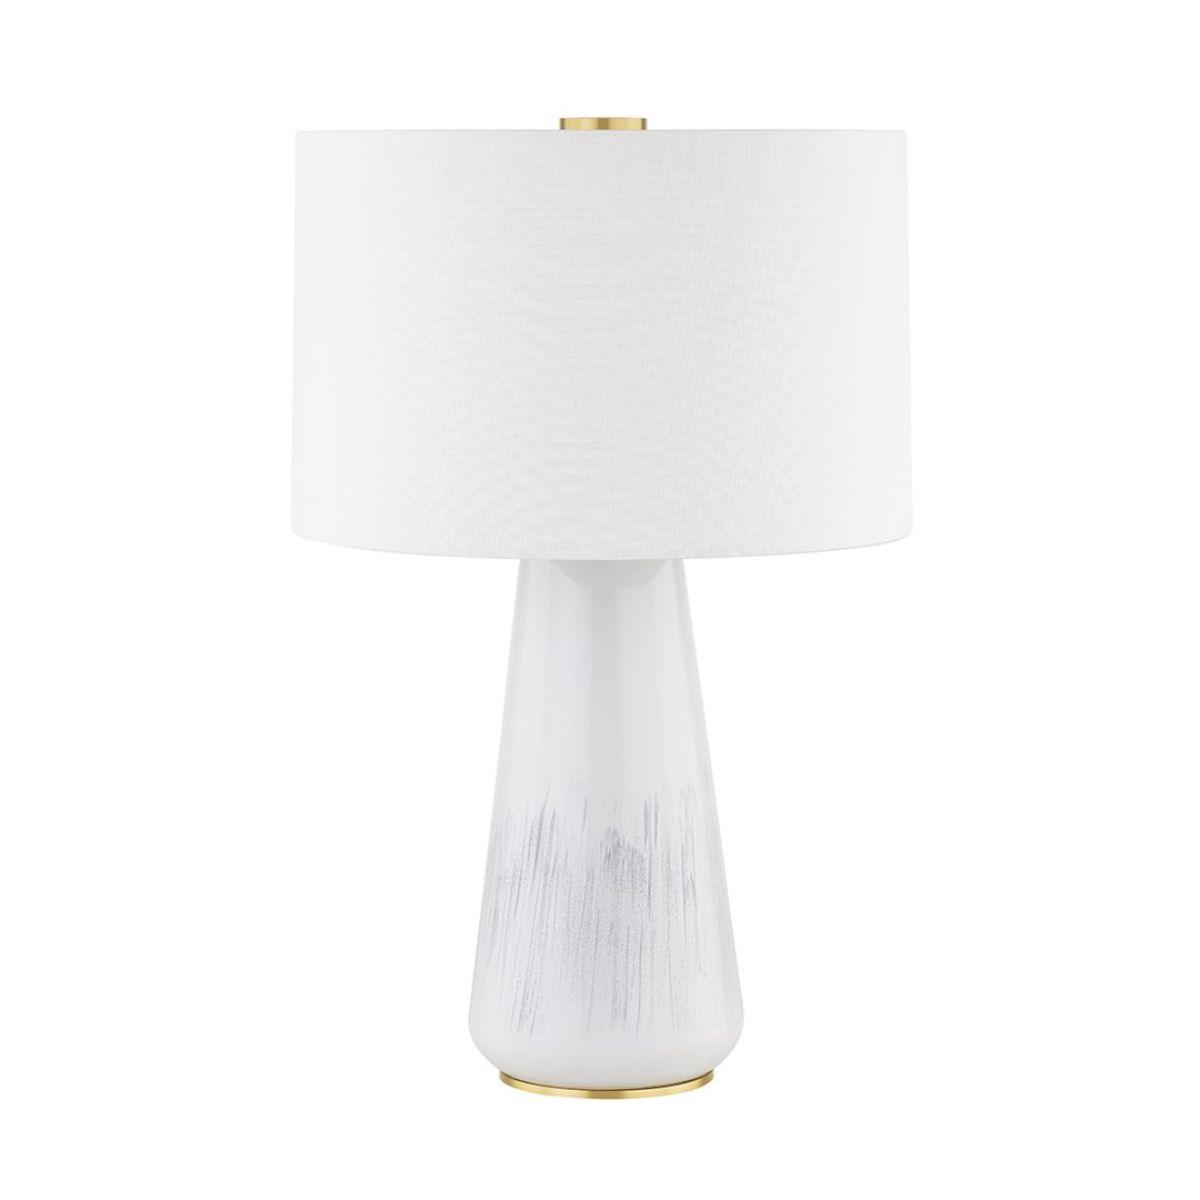 Saugerties Table Lamp Gloss White Ash Ceramic with Aged Brass Accents